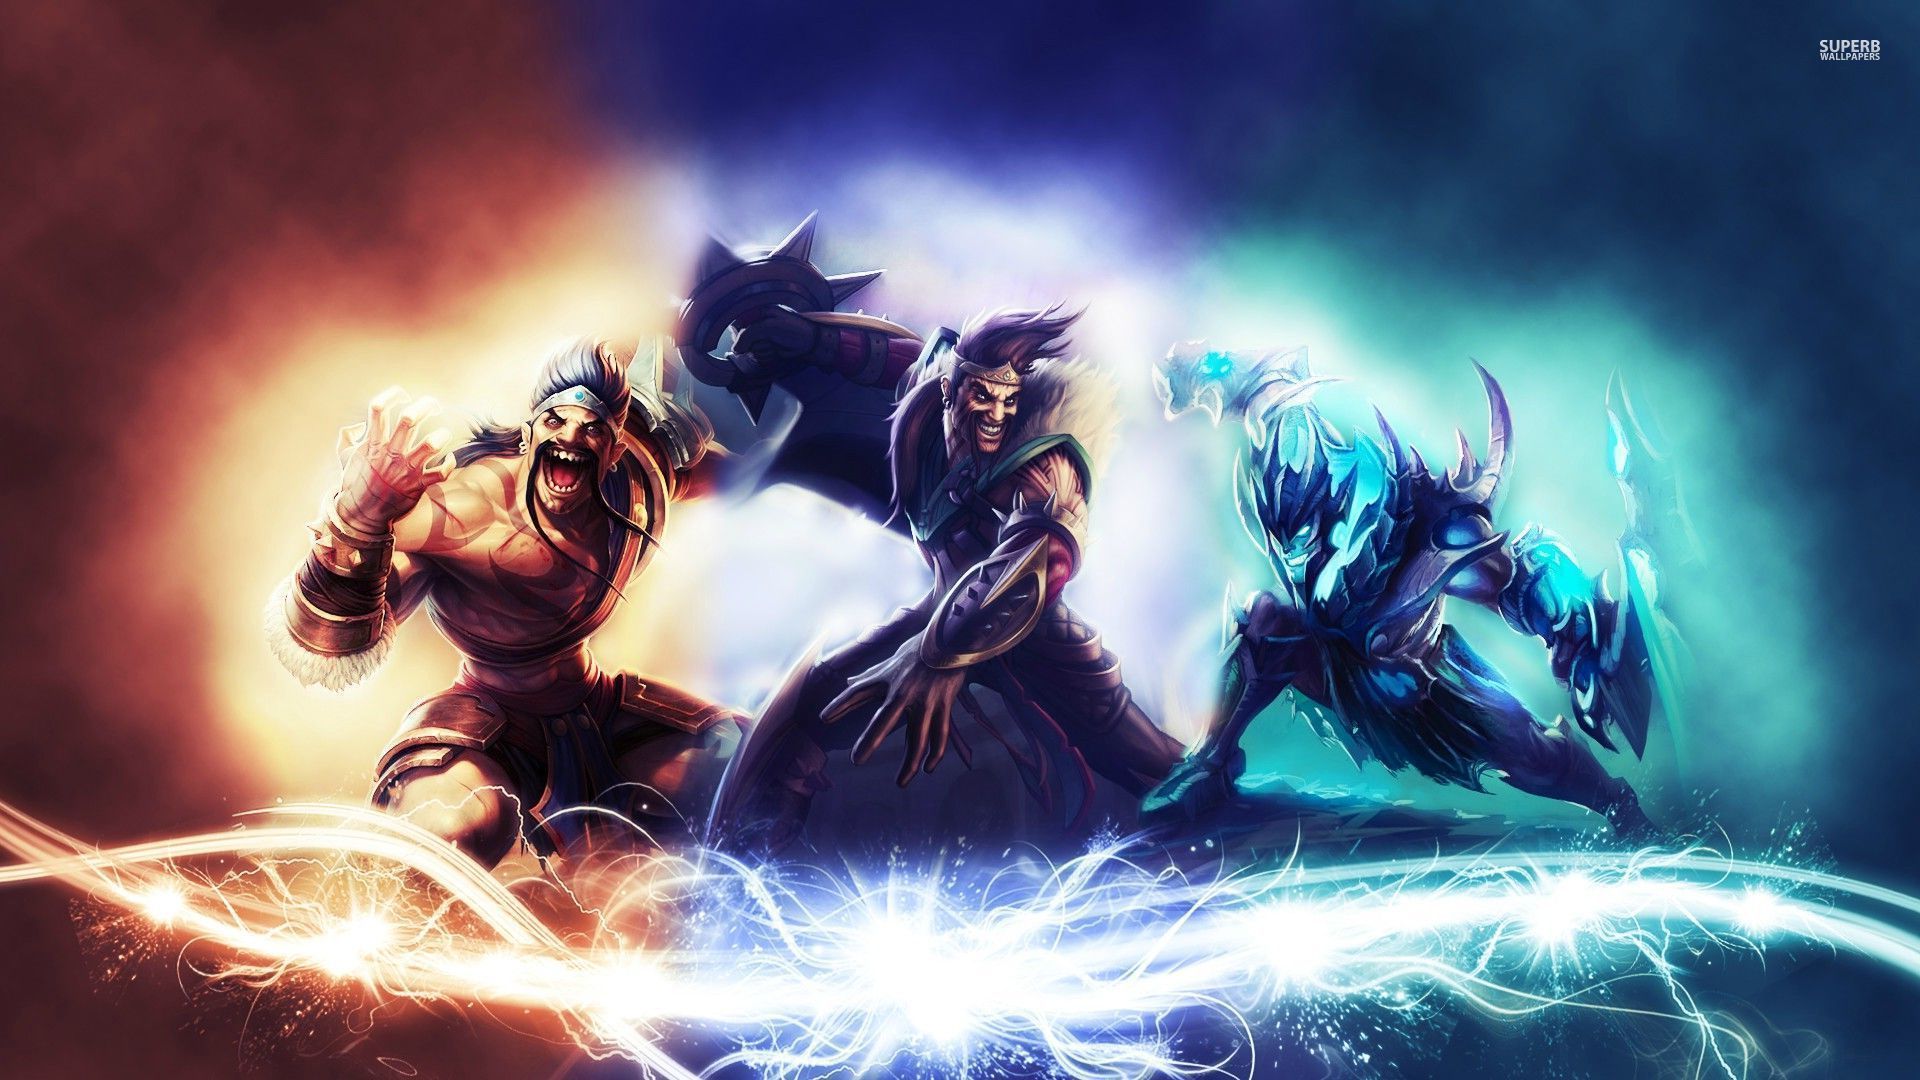 League of Legends wallpaper - Game wallpapers - #28504